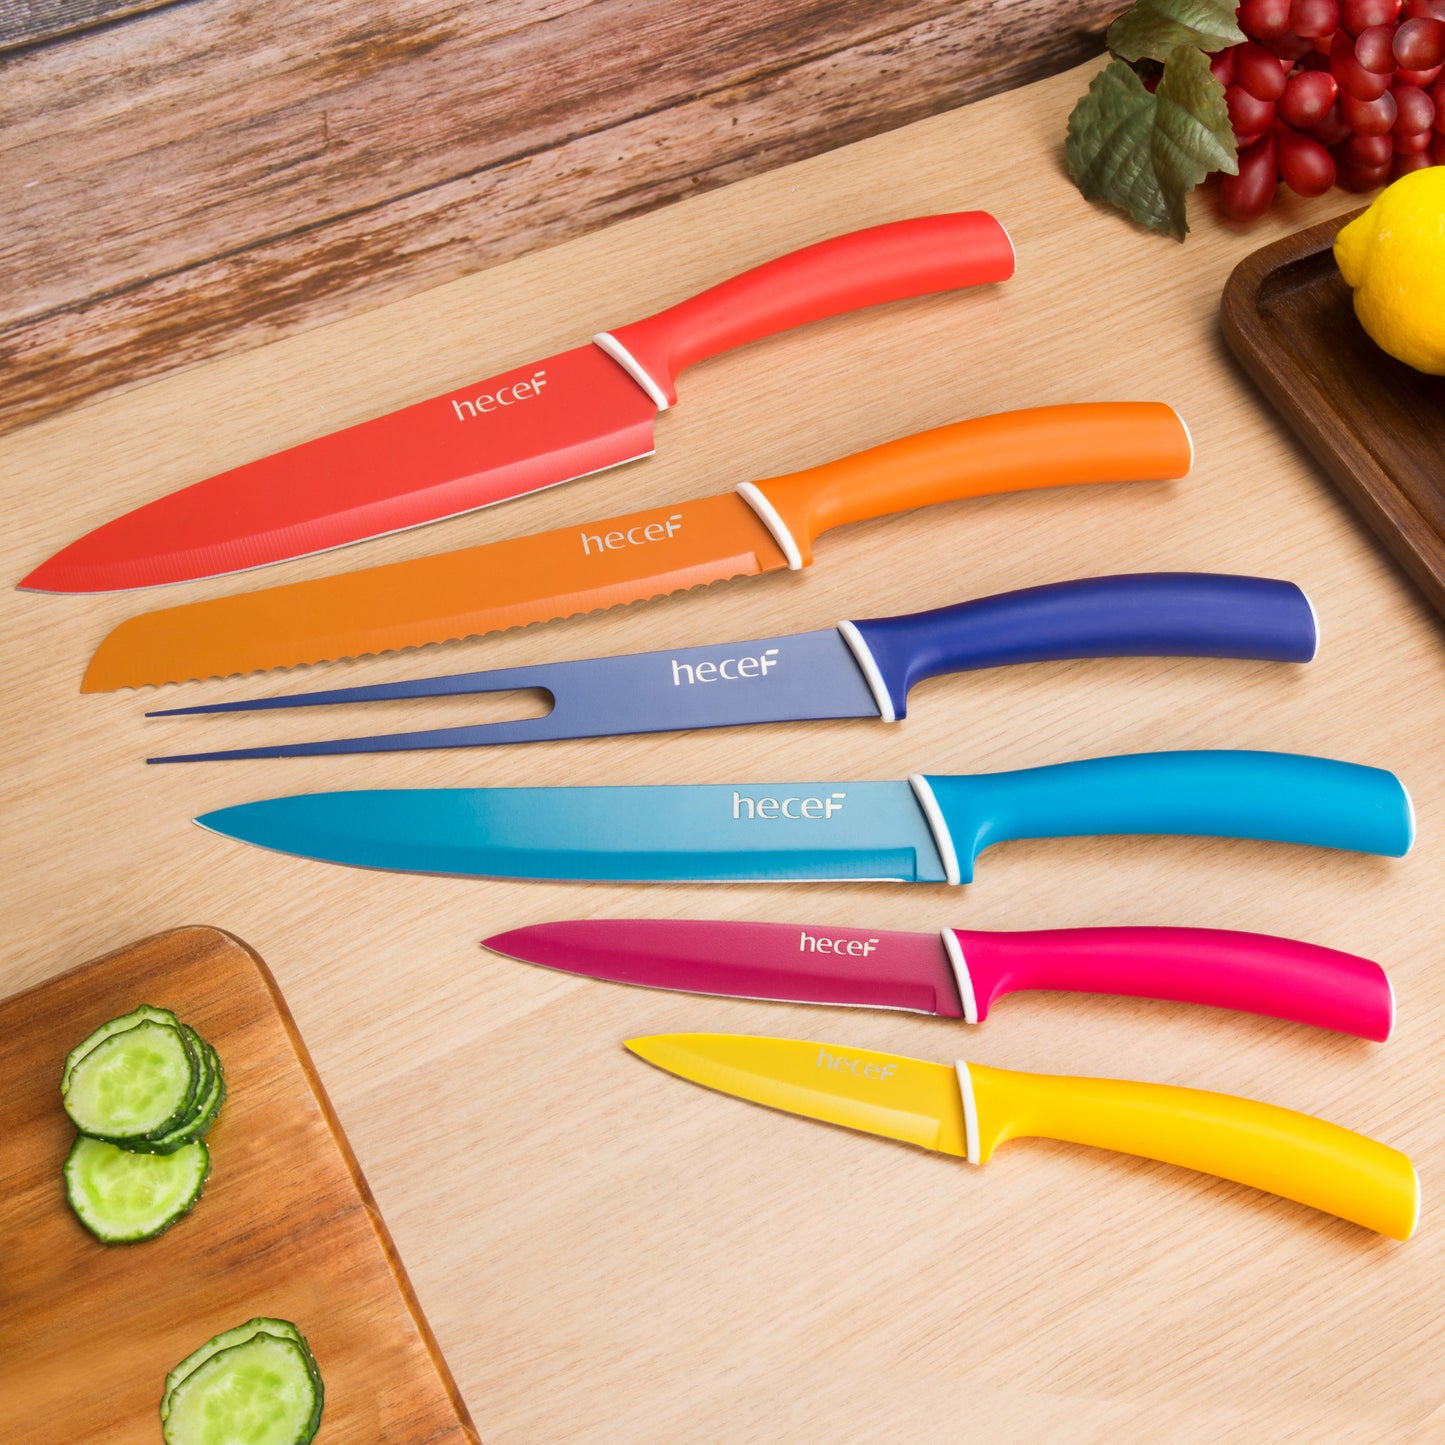 Hecef Kitchen Multicolored Rainbow Knife Set of 6 with Sheaths - Hecef Kitchen